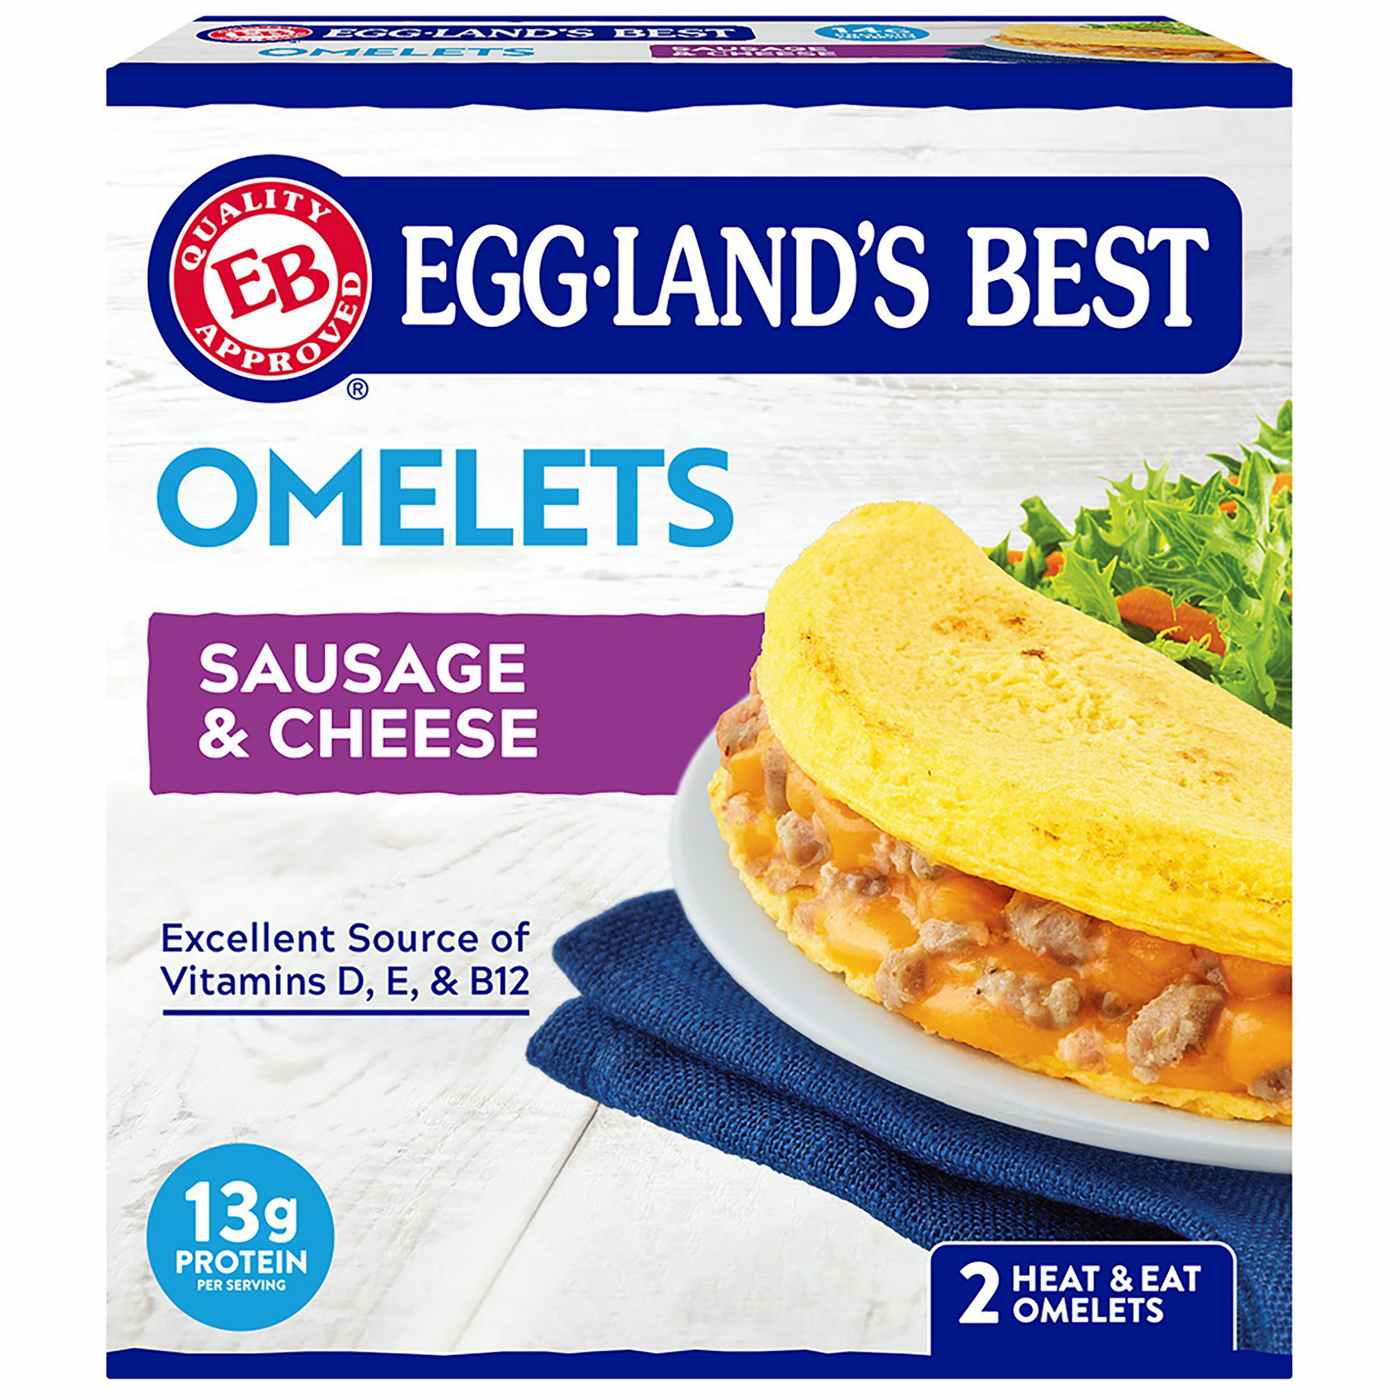 Eggland's Best Sausage & Cheese Omelets; image 1 of 9